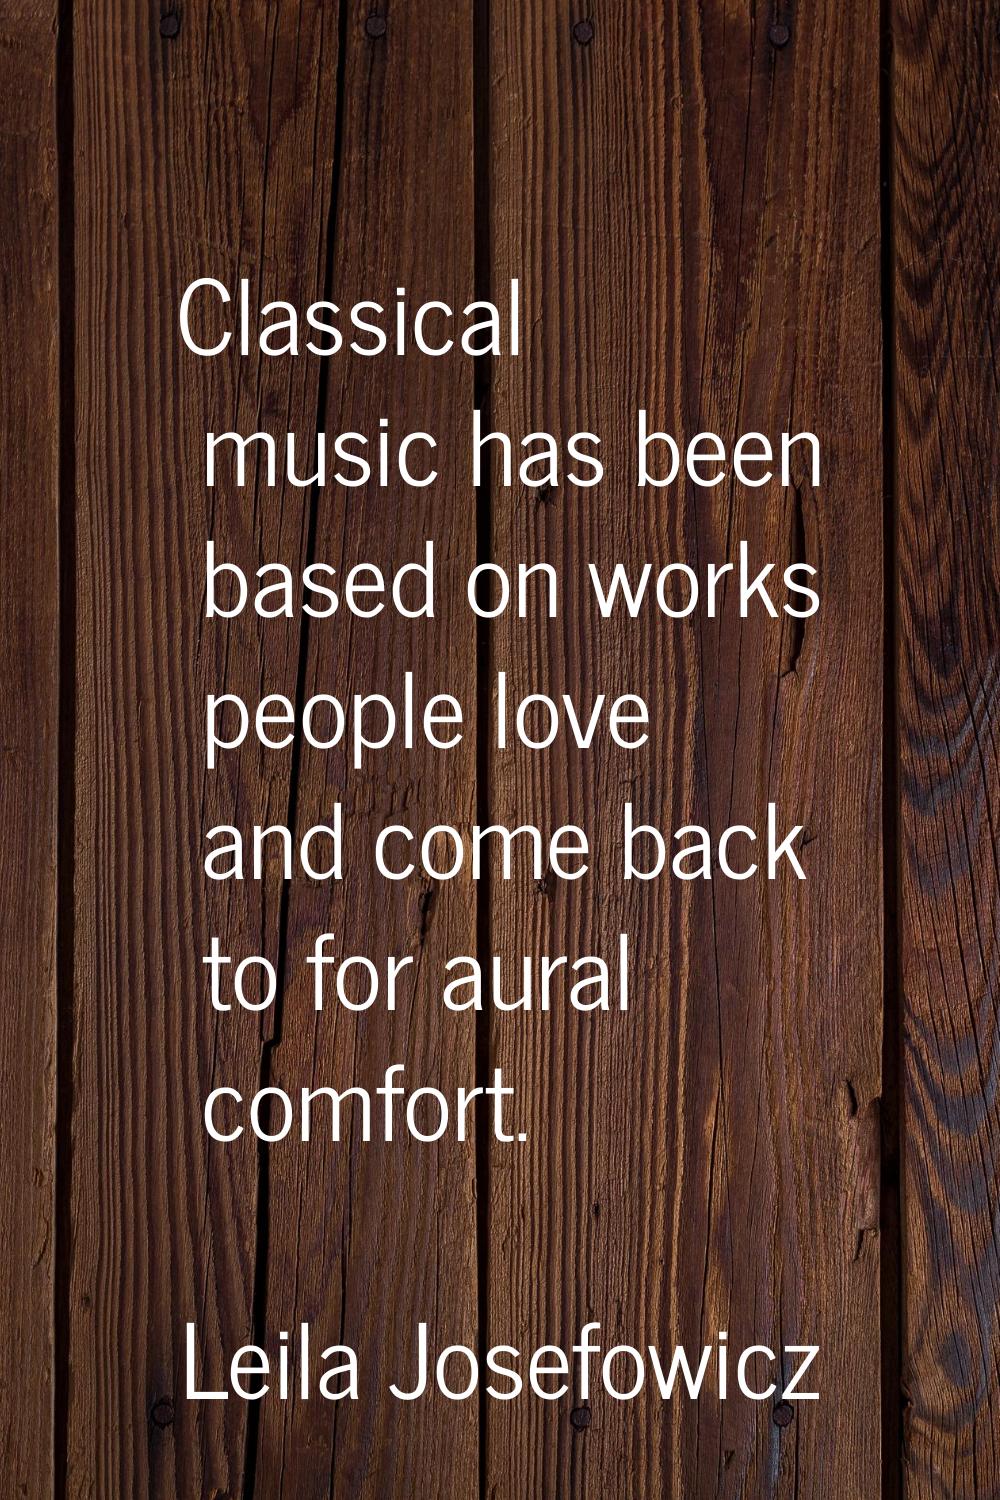 Classical music has been based on works people love and come back to for aural comfort.